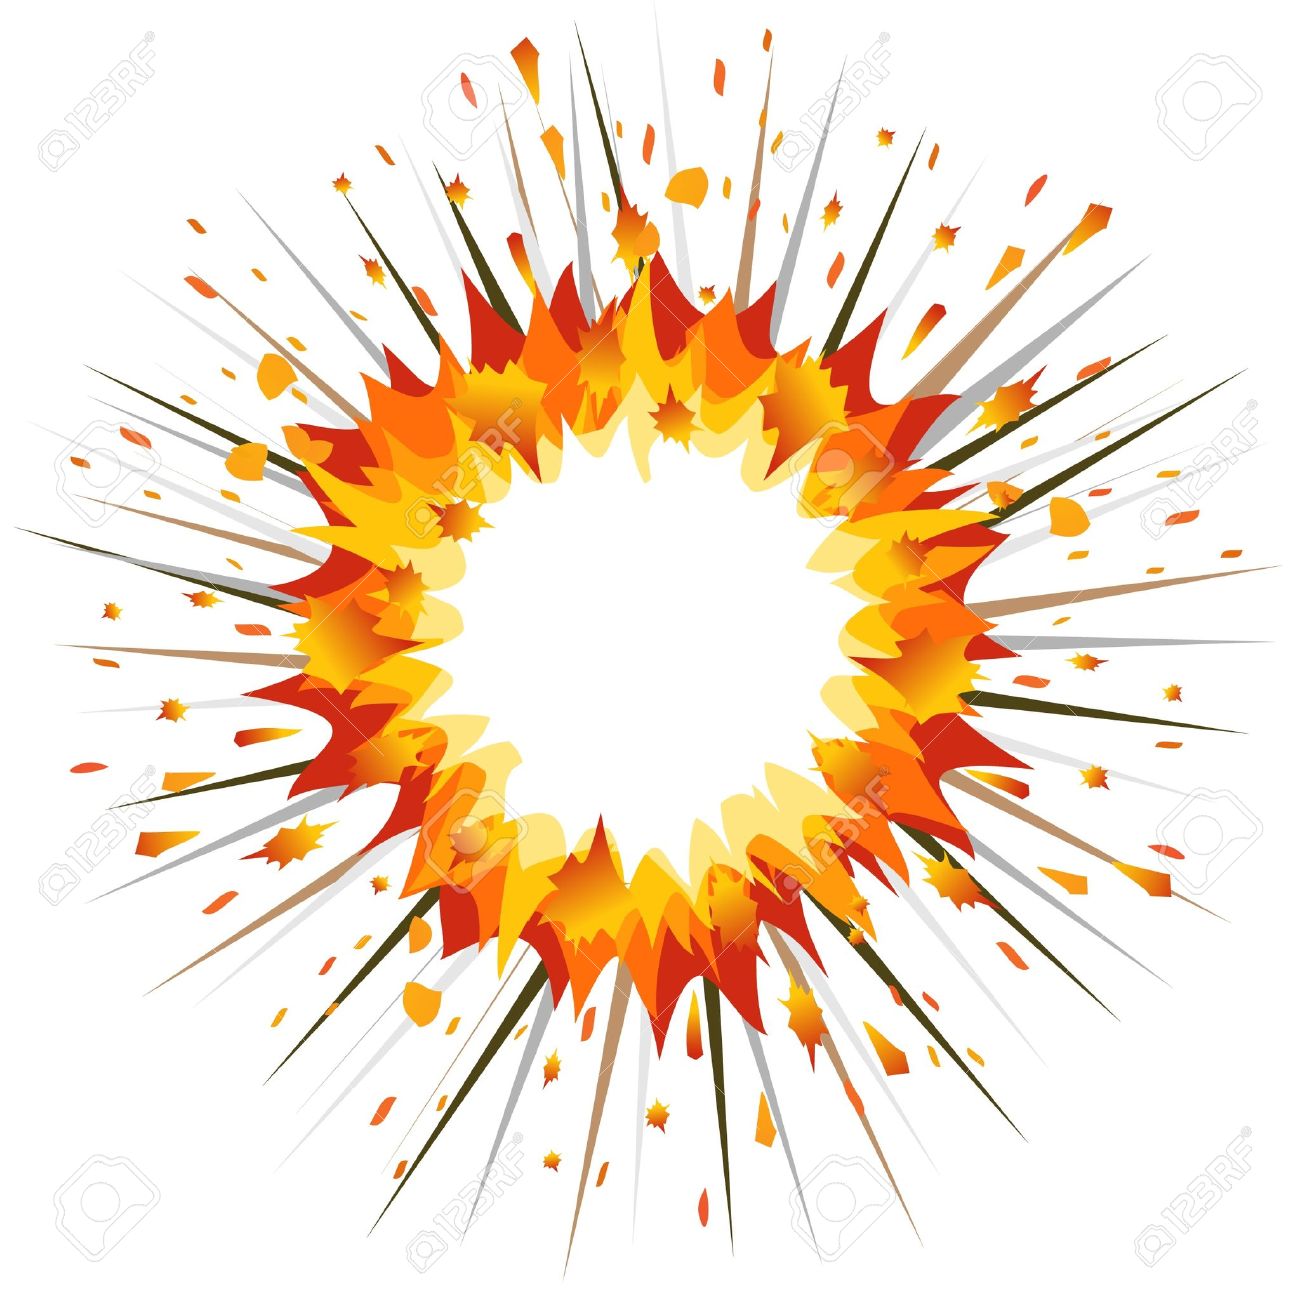 Explosion clip art free free clipart images 7